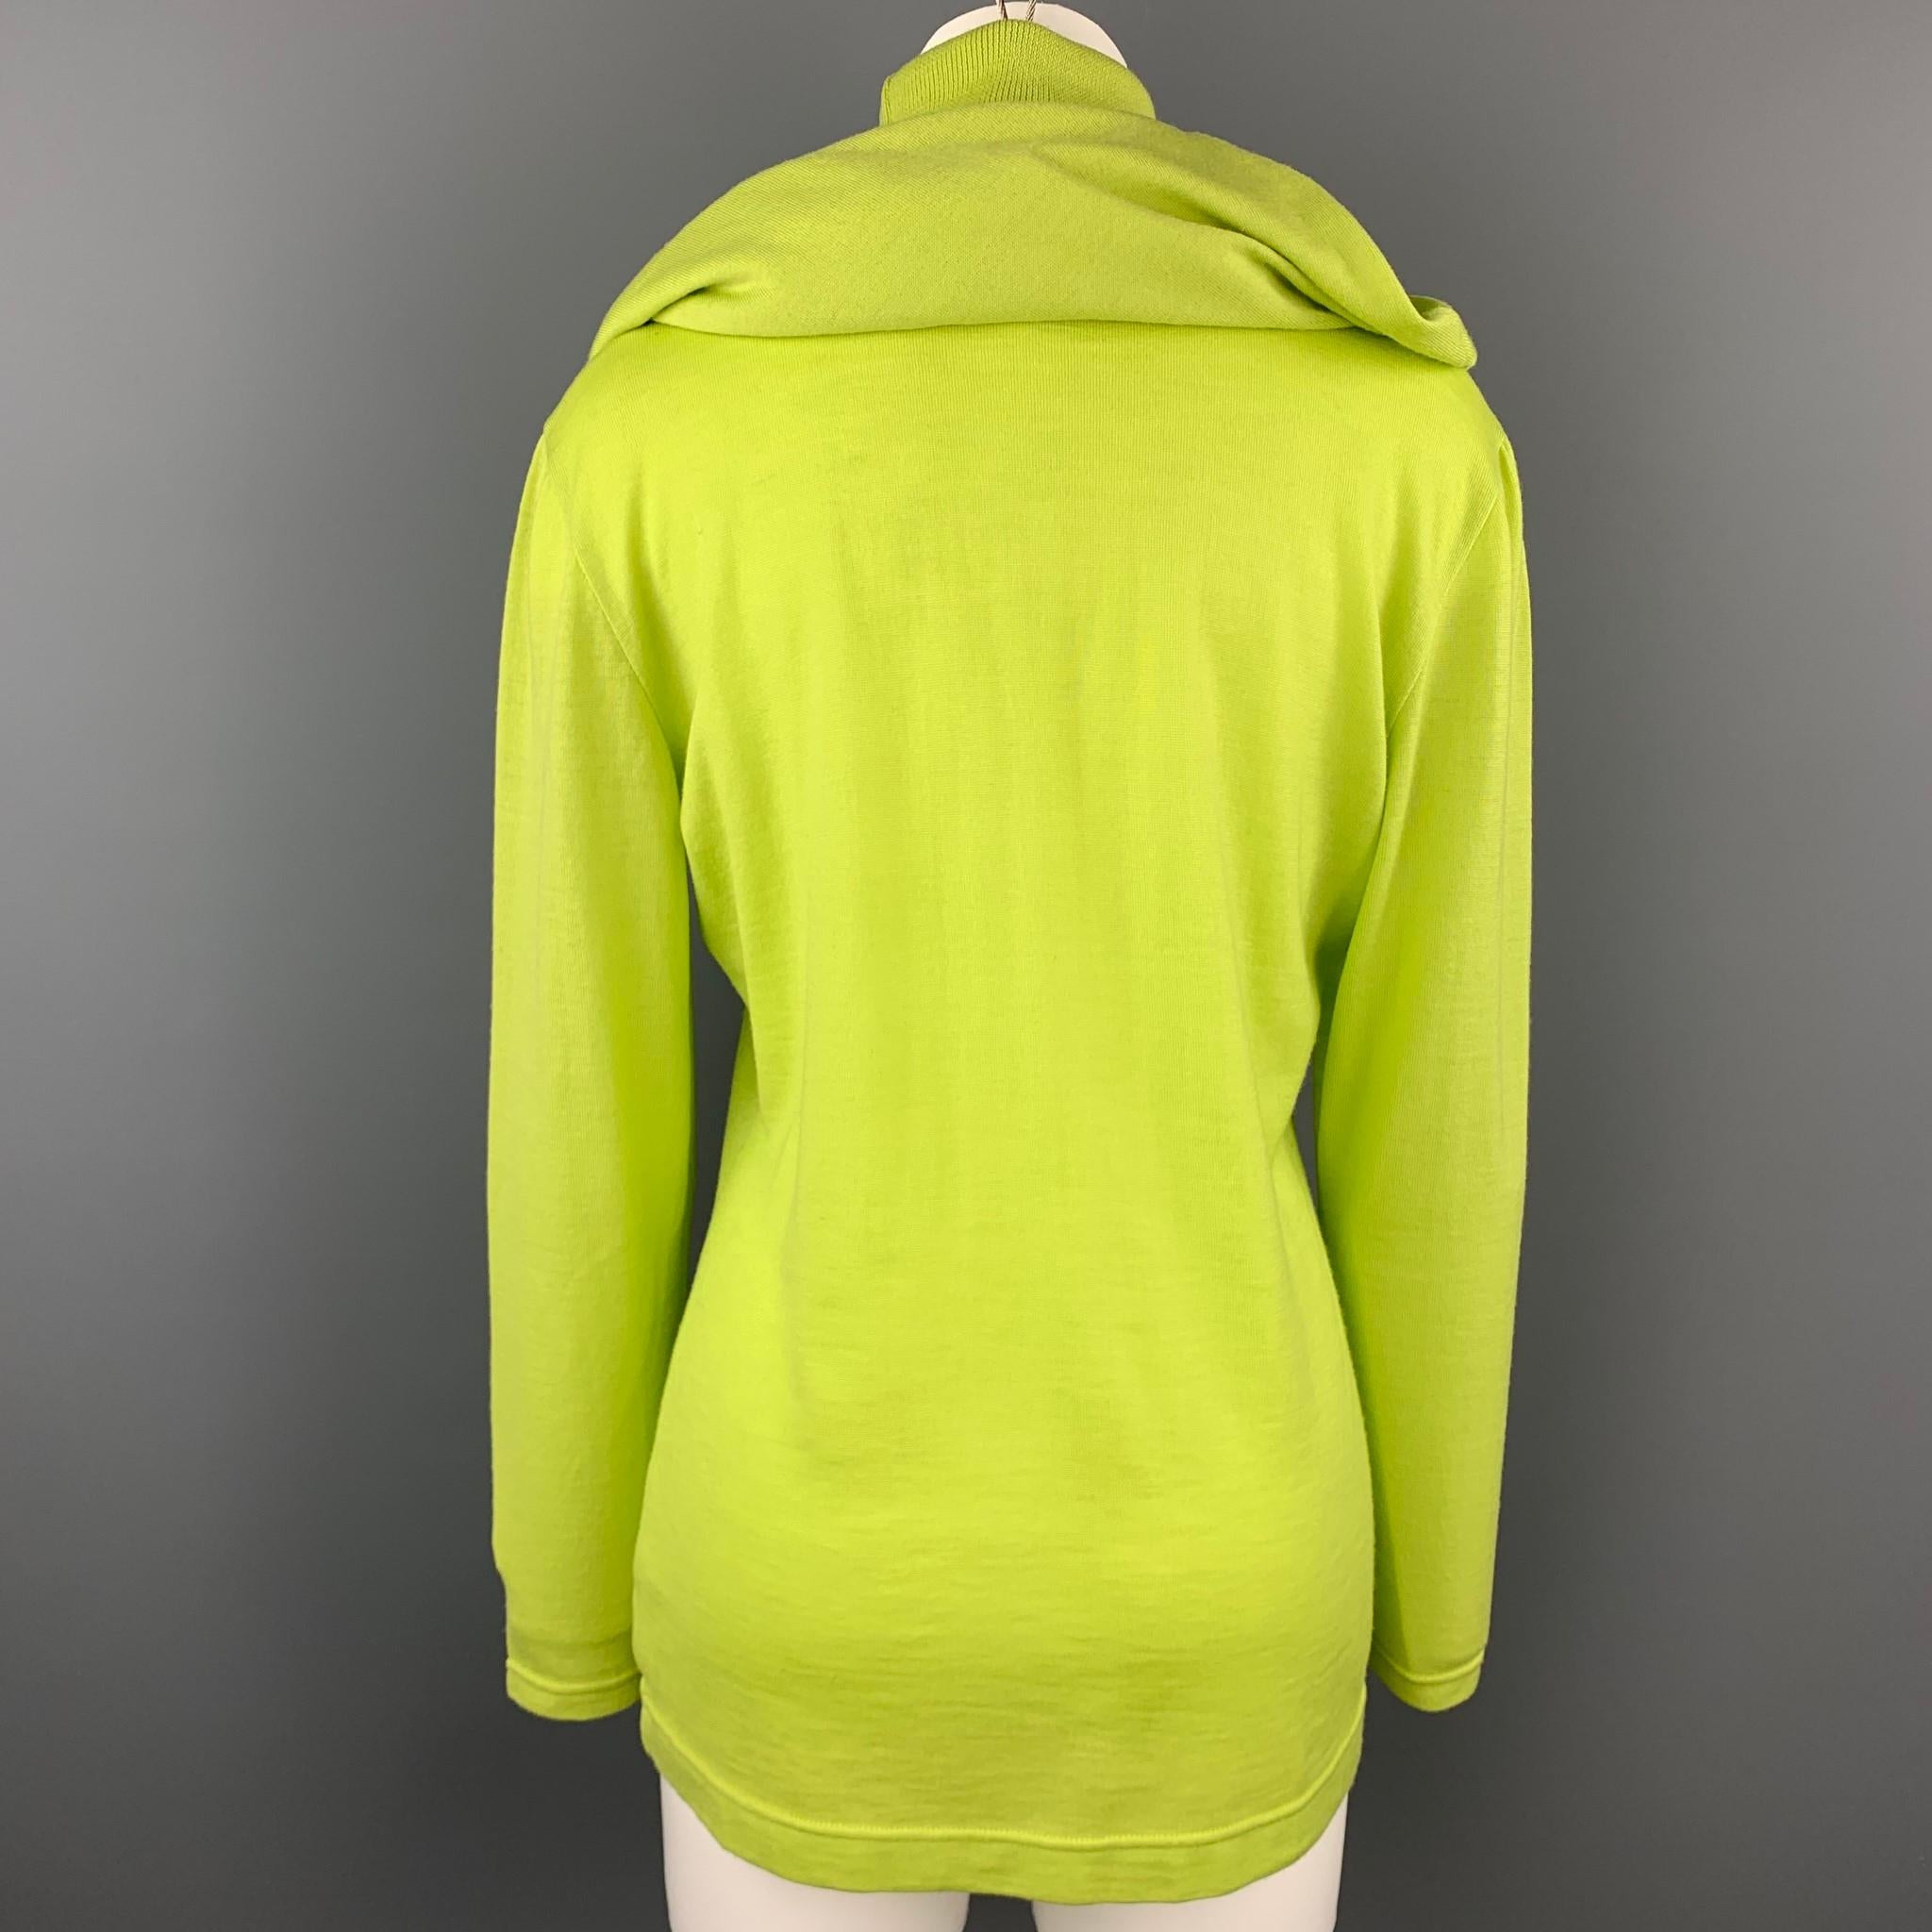 Women's GIANNI VERSACE Size L Lime Green Wool Cape Overlay Turtleneck Sweater